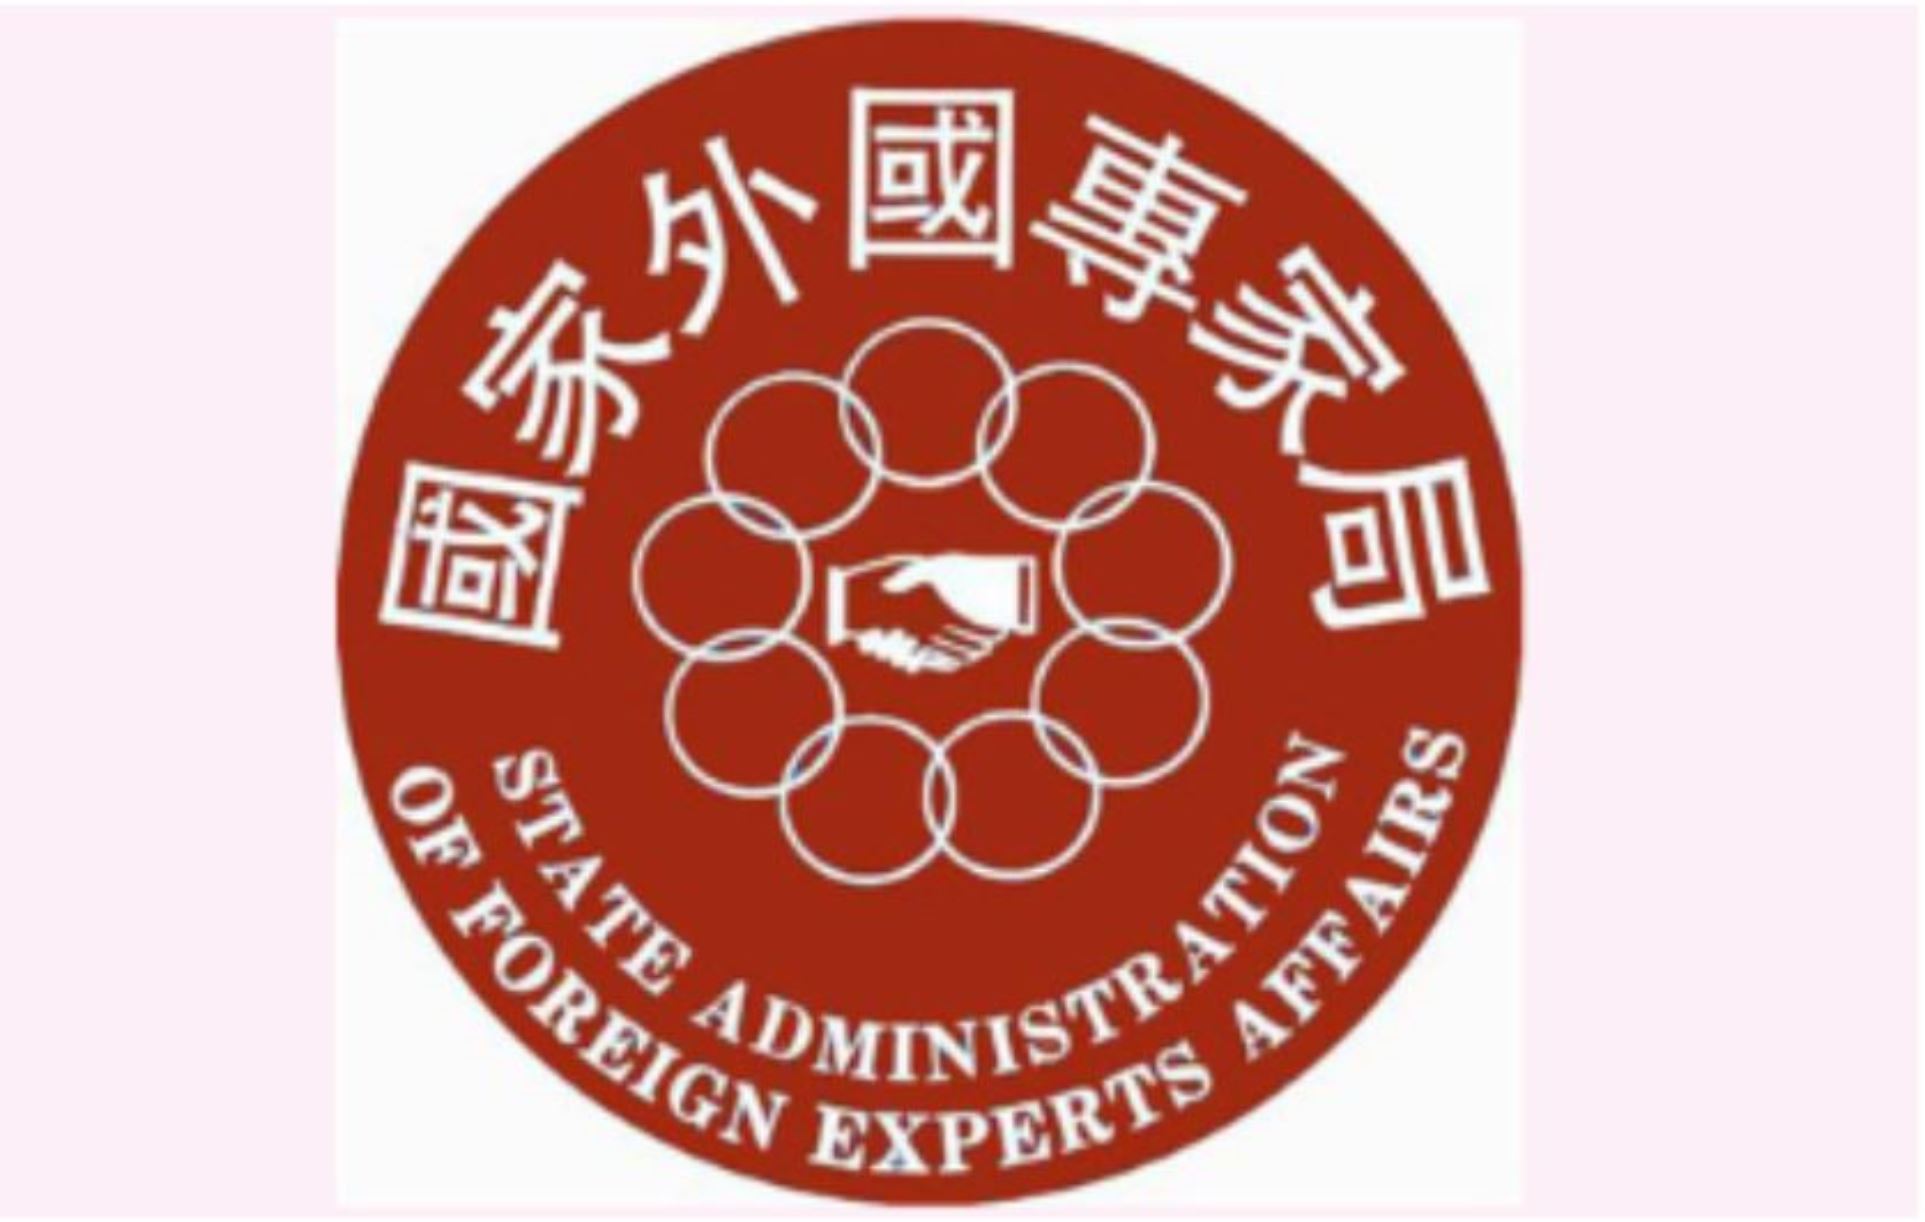 State Administration of Foreign Expert Affairs: Notice on Implementation of Plans for Employment Licenses for Foreigners Coming to China for Work